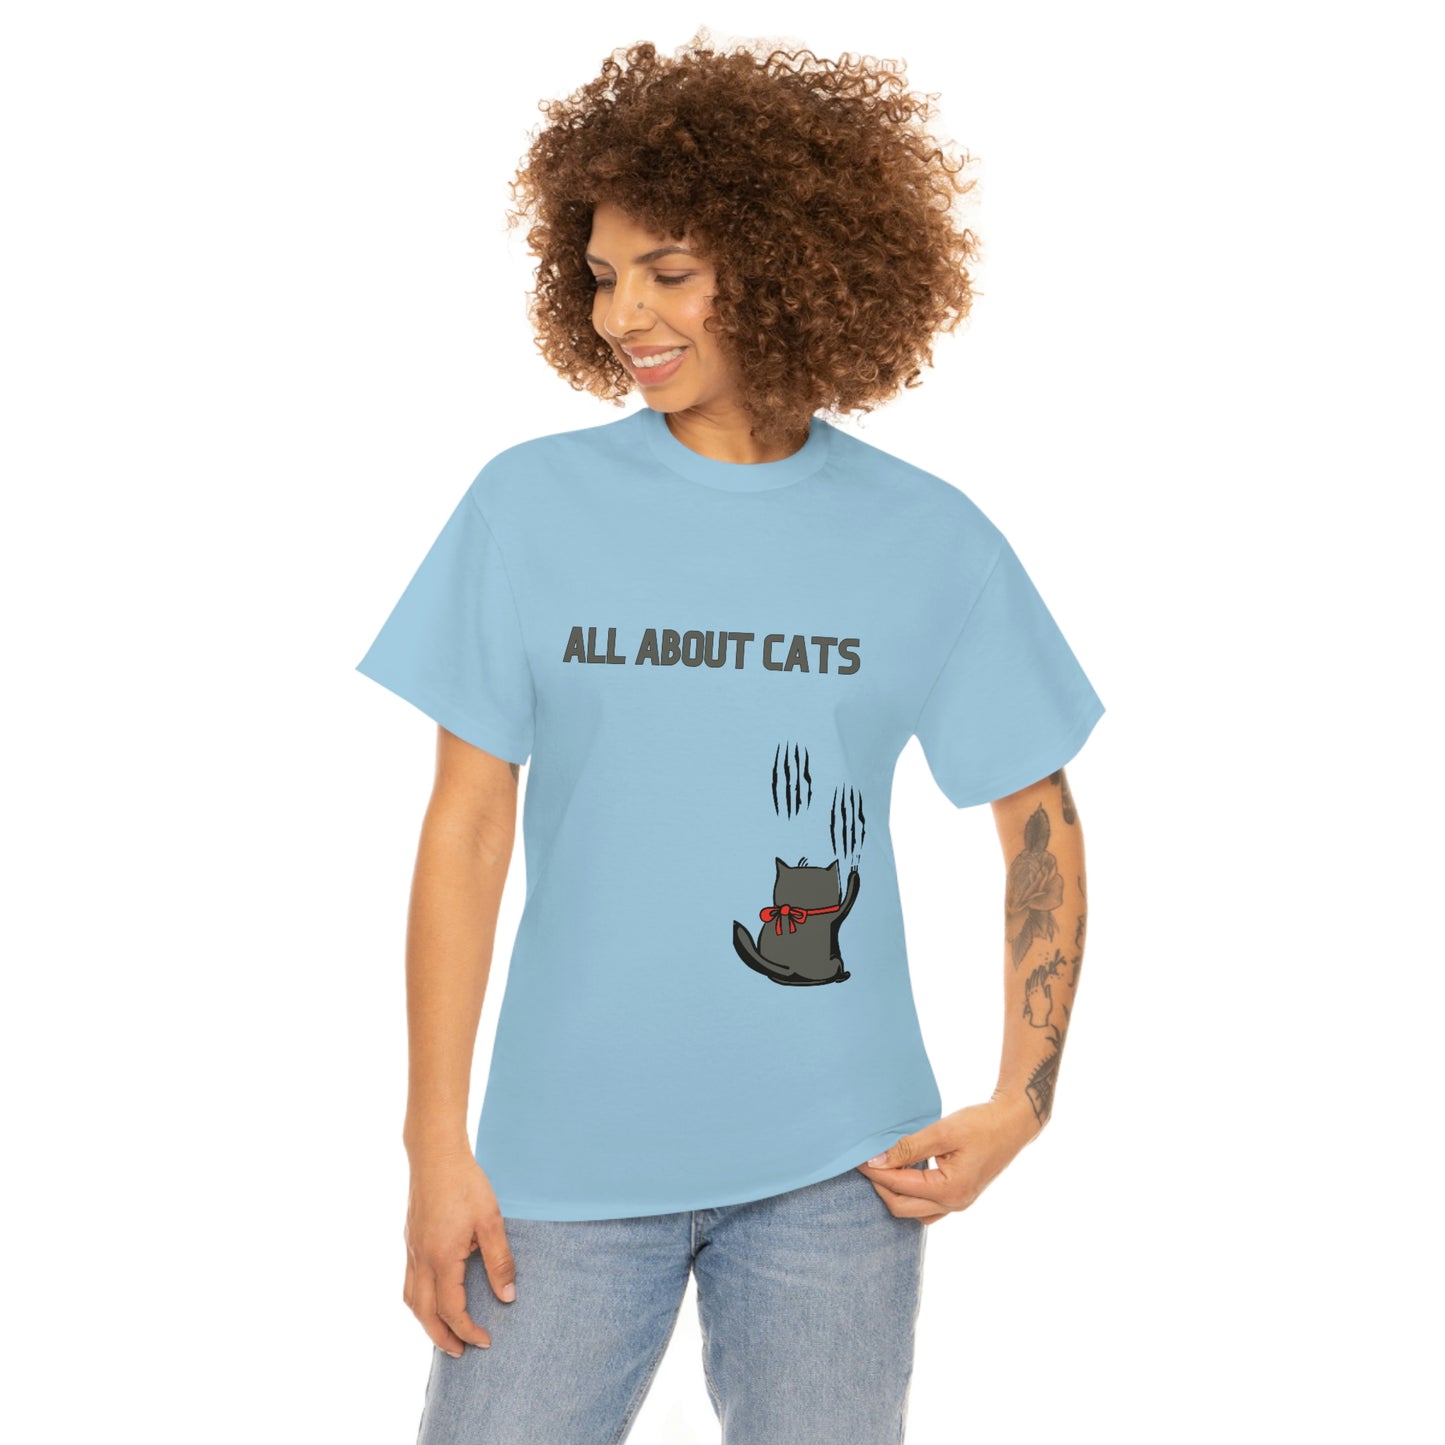 All About Cats Cat Scratches design Graphic tee shirt